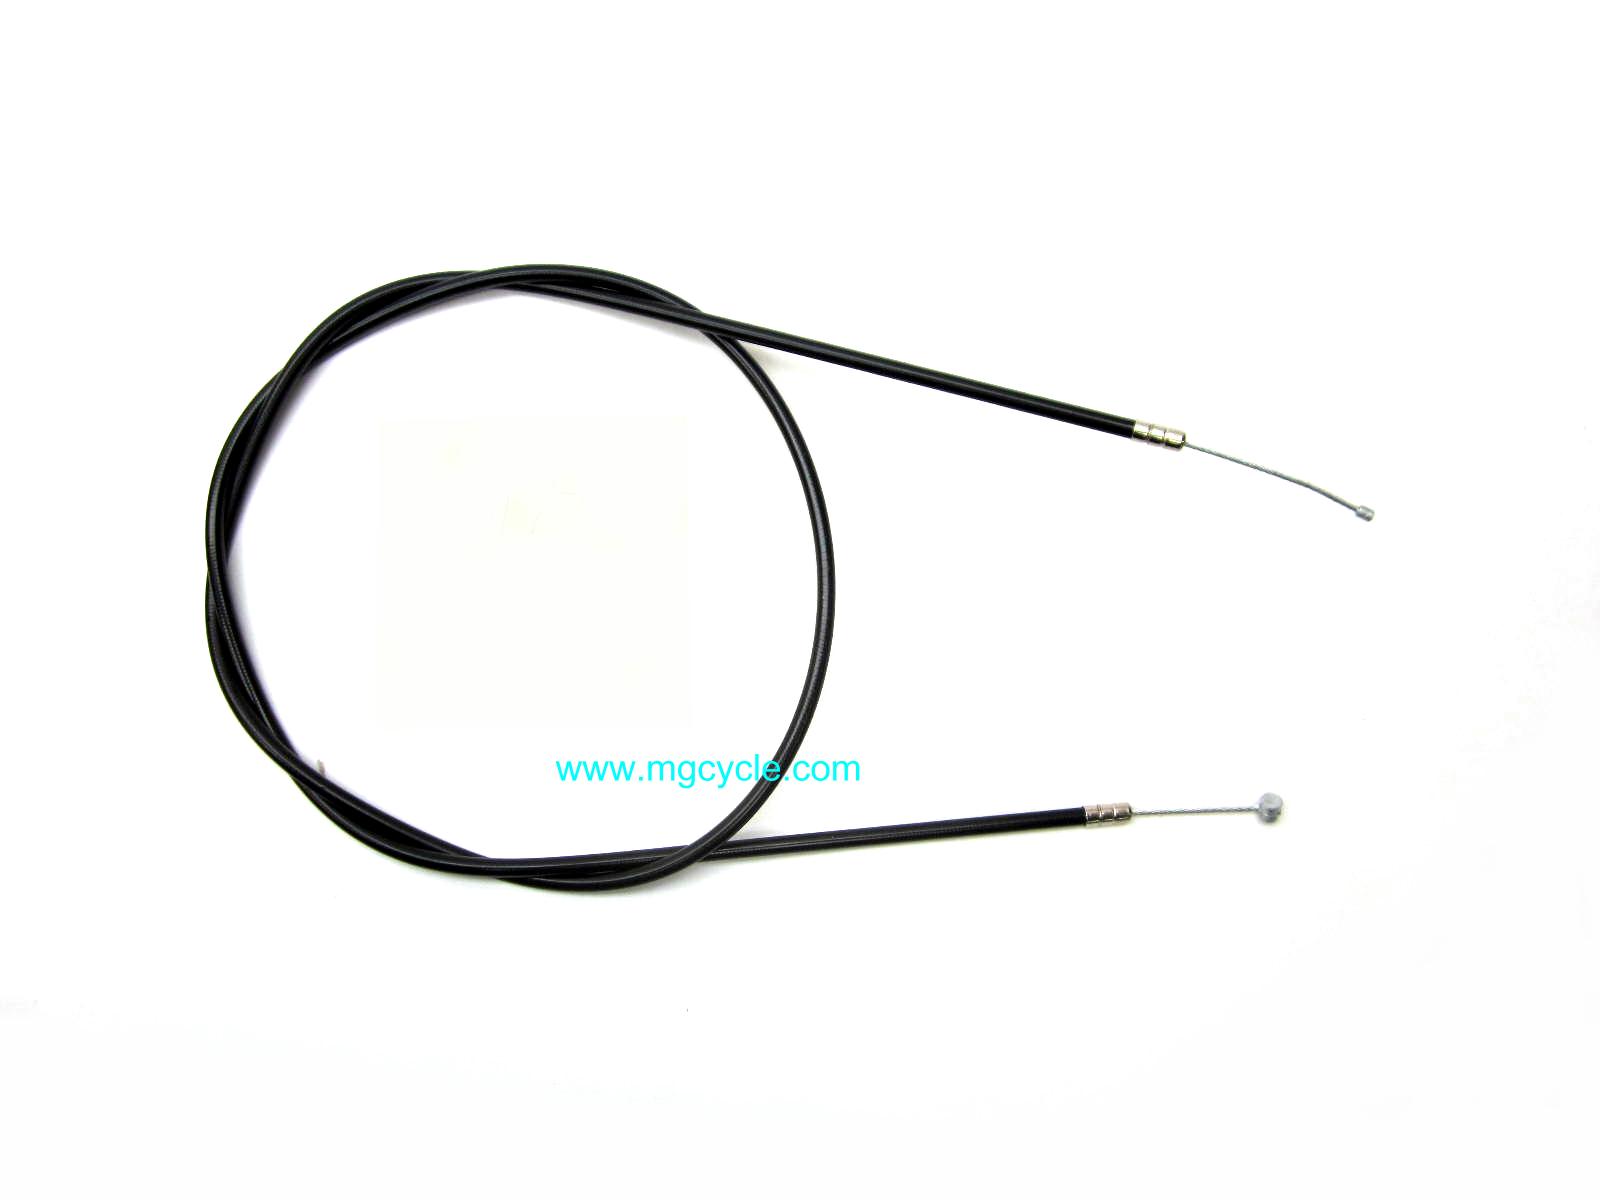 Throttle cable, some G5, Convert, T3, T4, VHB ~43 inch sheath - Click Image to Close